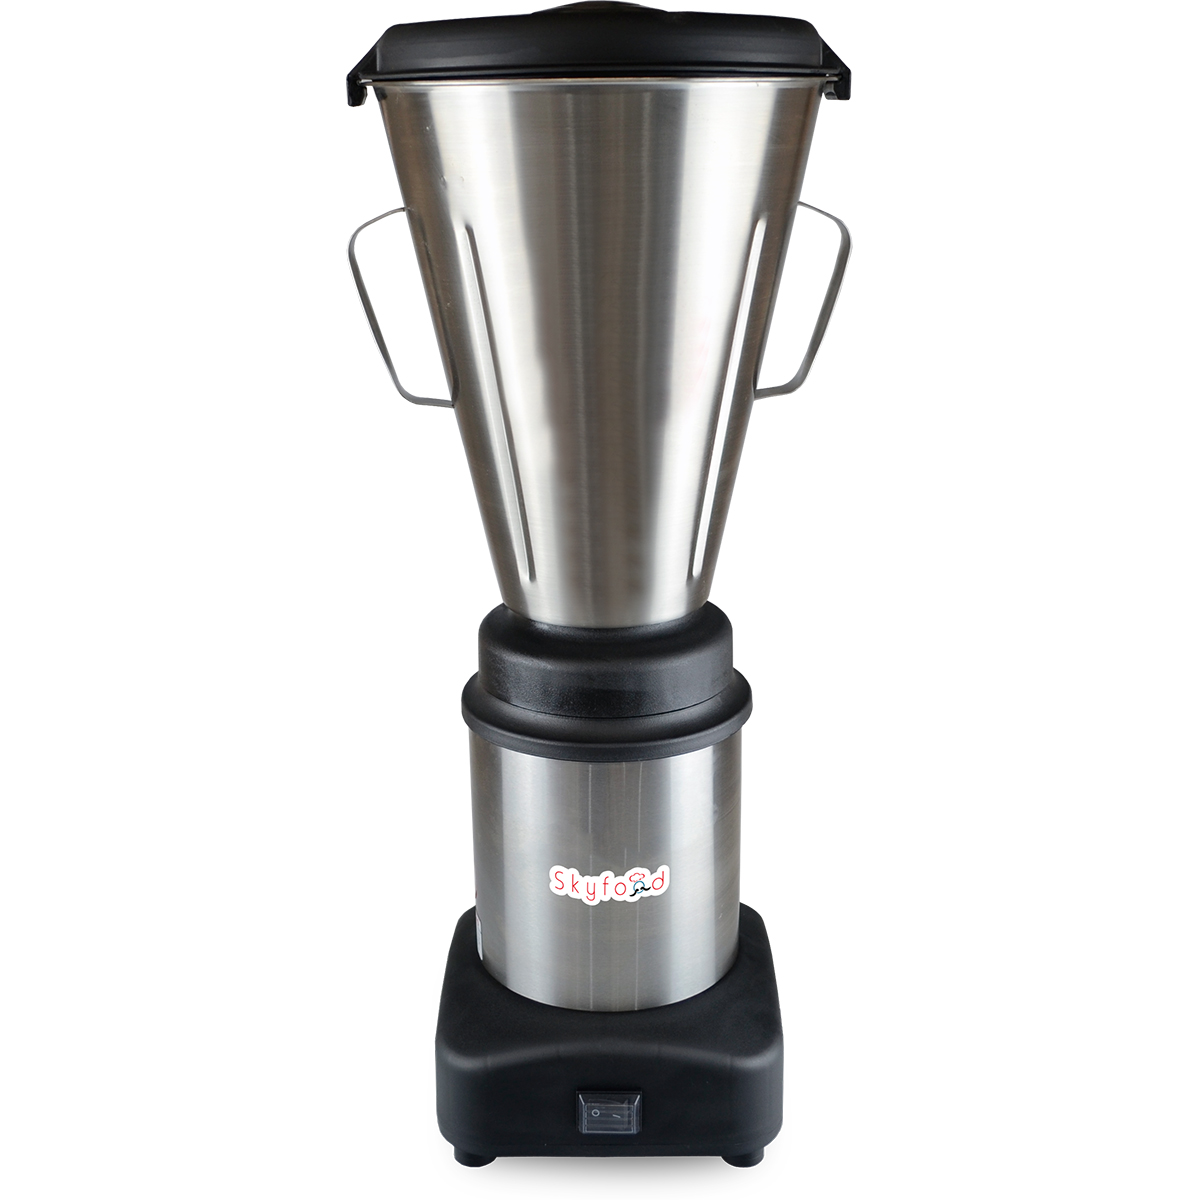 Skyfood LAR-10MBS 2-1/2 Gal Food Blender 3,500 RPM 1/2 HP - Stainless Steel Seamless Container